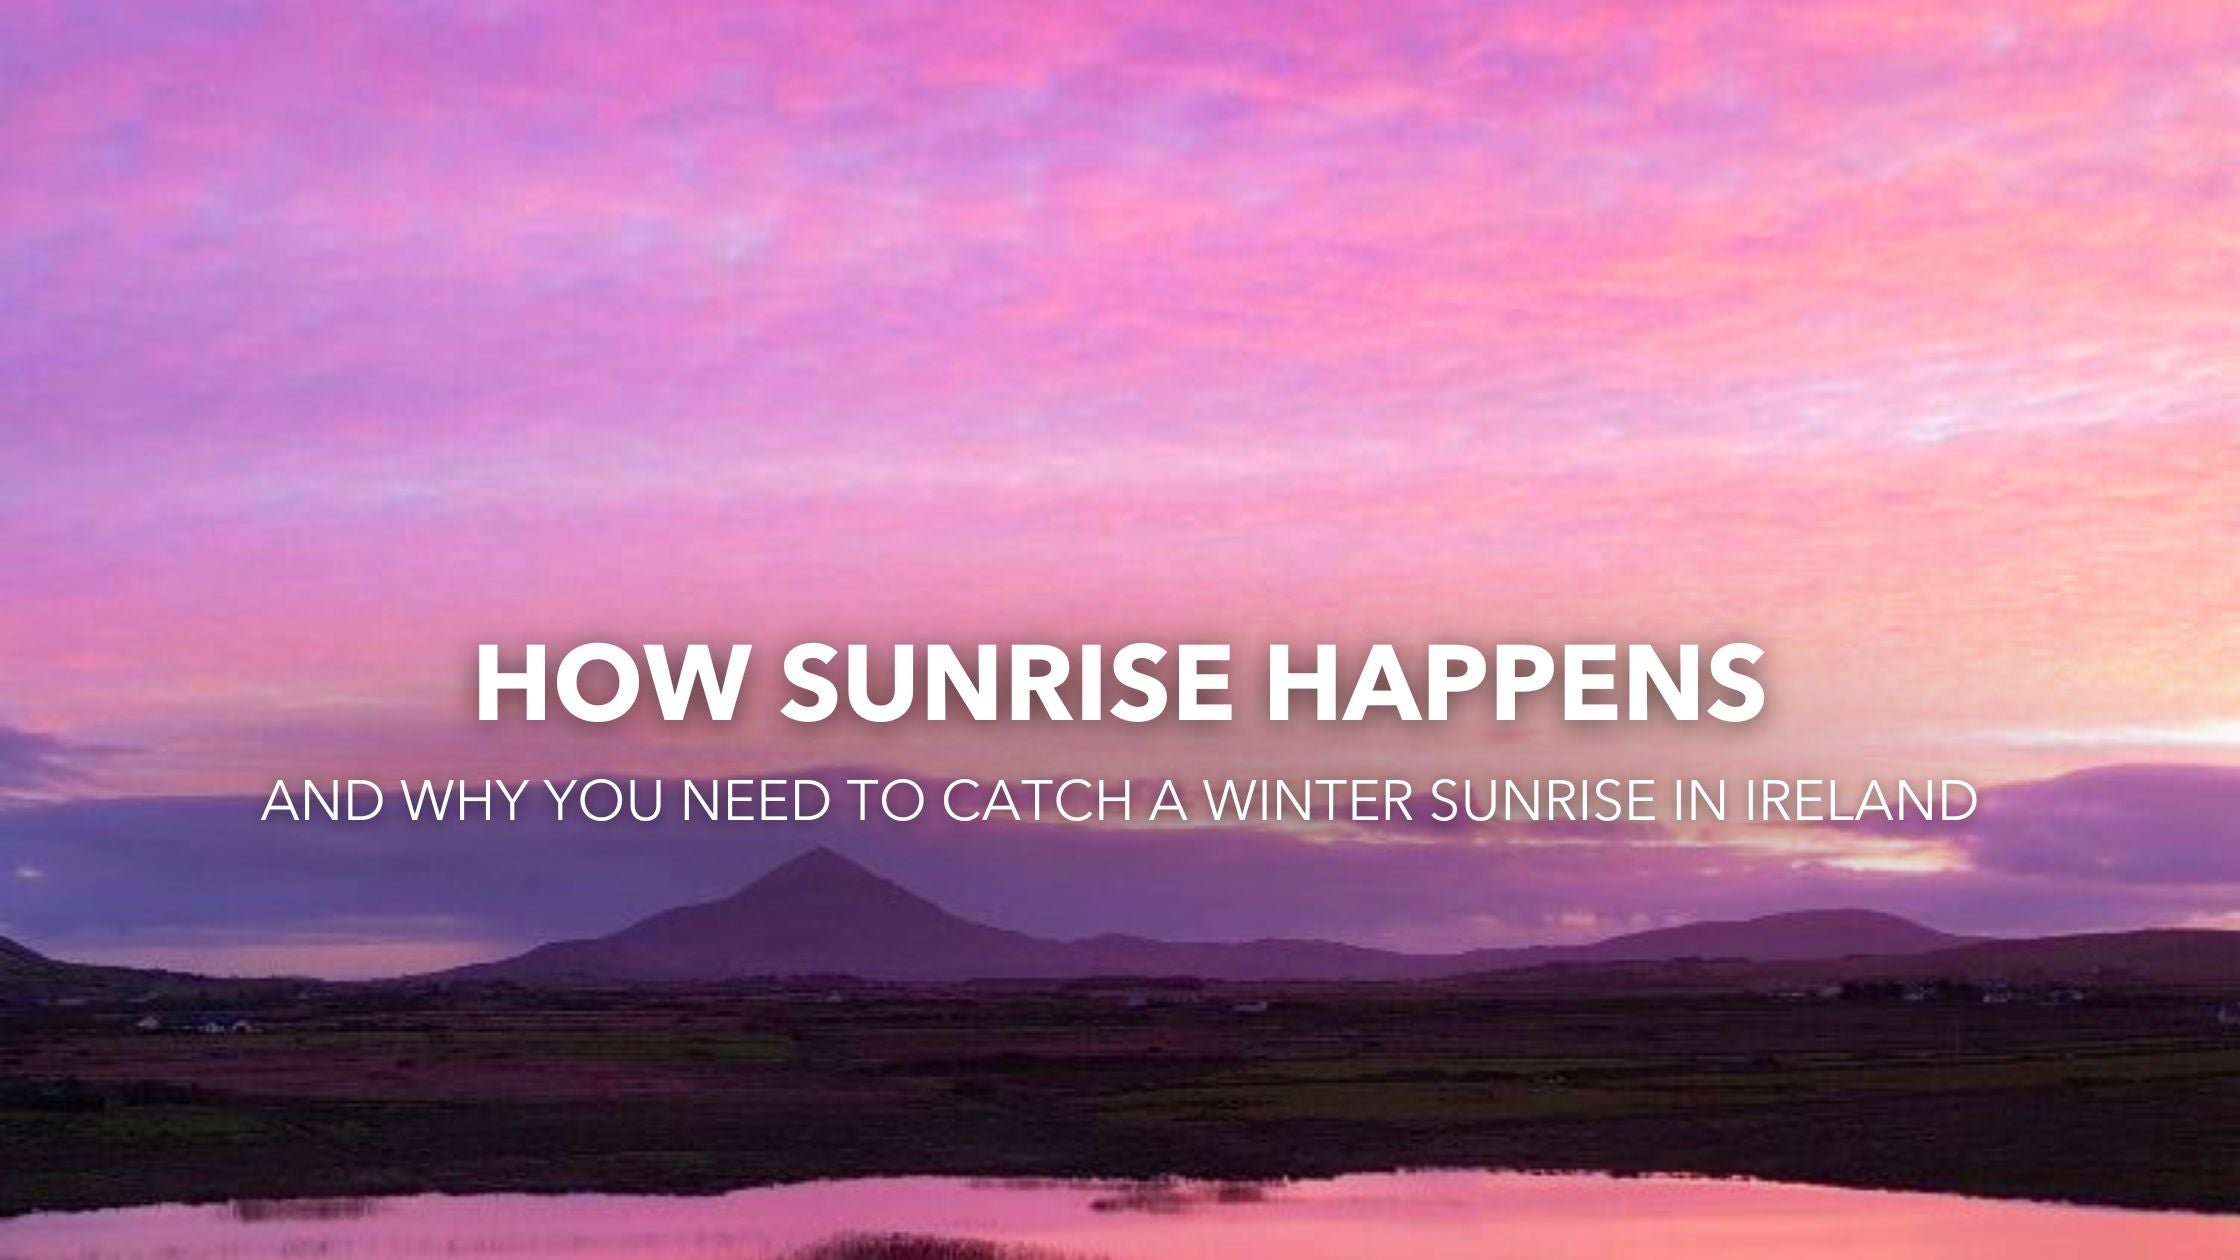 How Sunrise Happens and Why You Need to Catch a Winter Sunrise